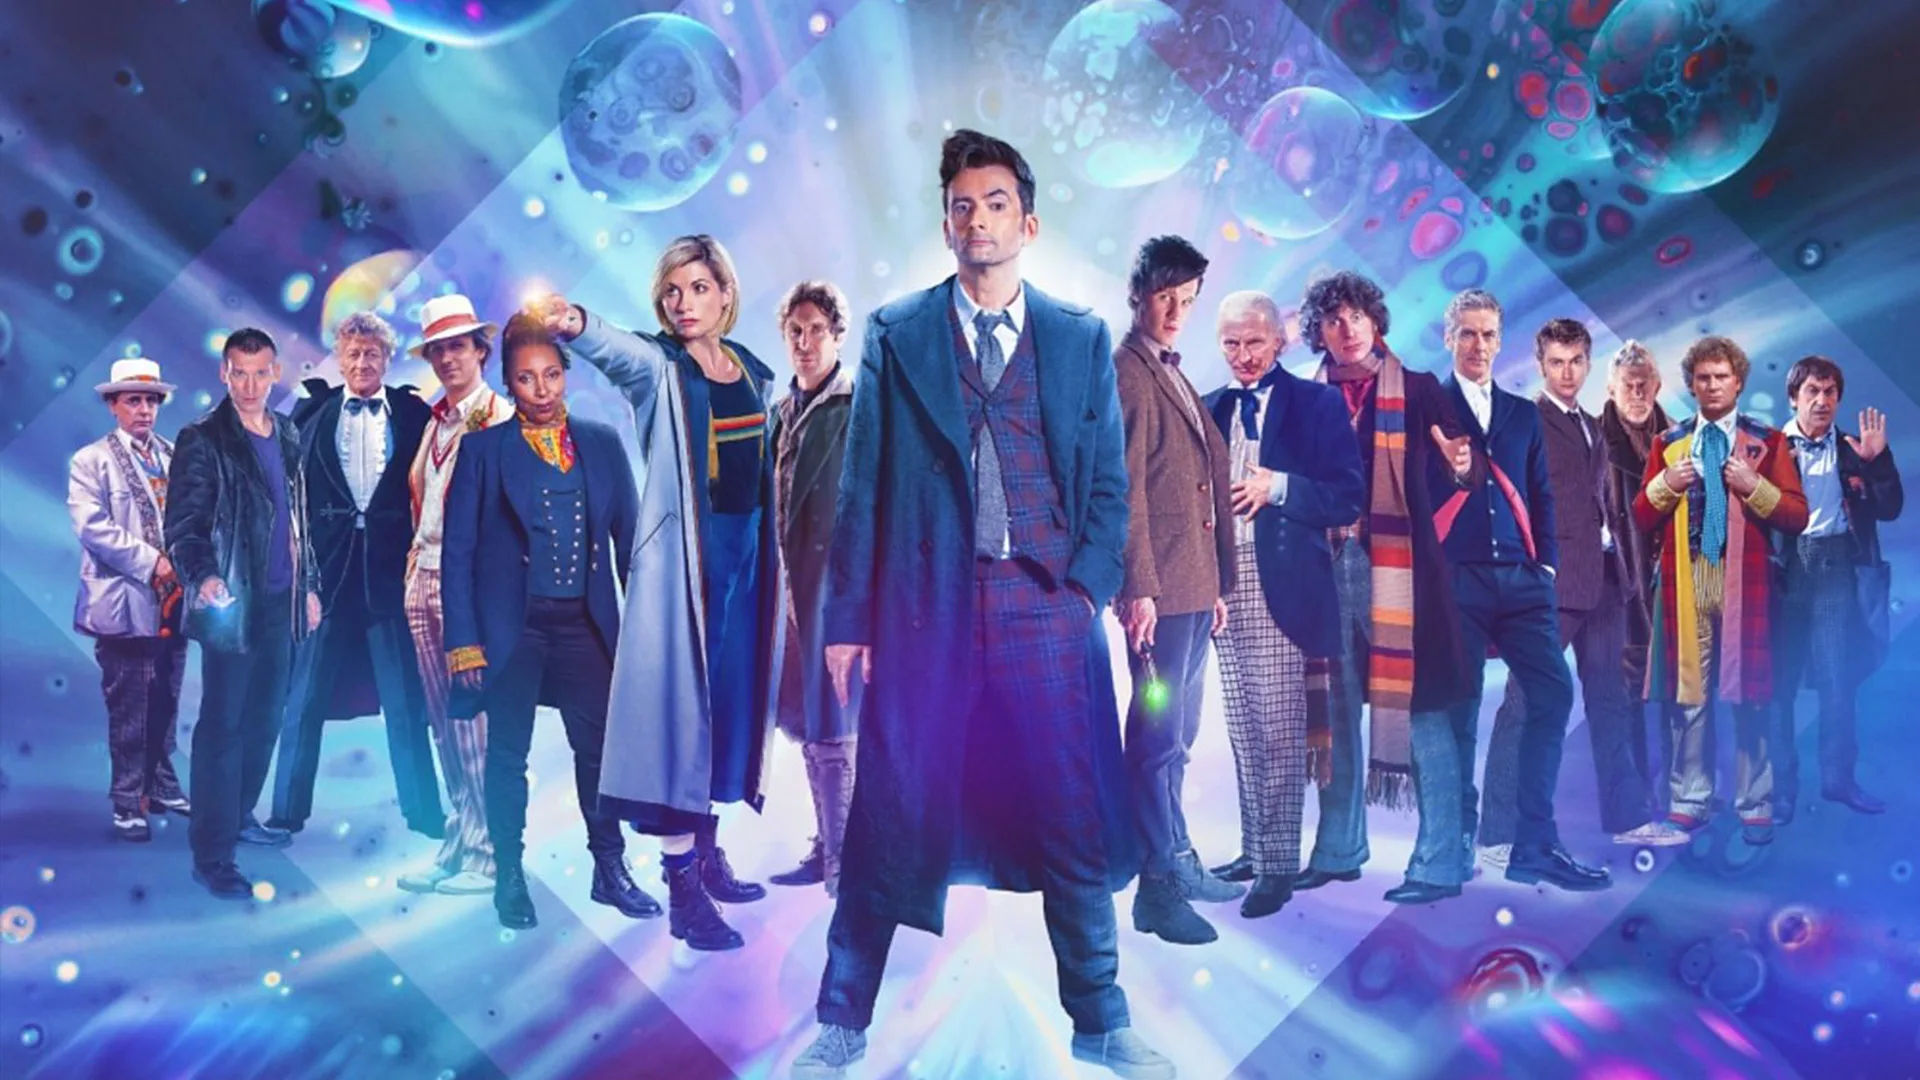 Cast of Doctor Who stood in a line against blue background